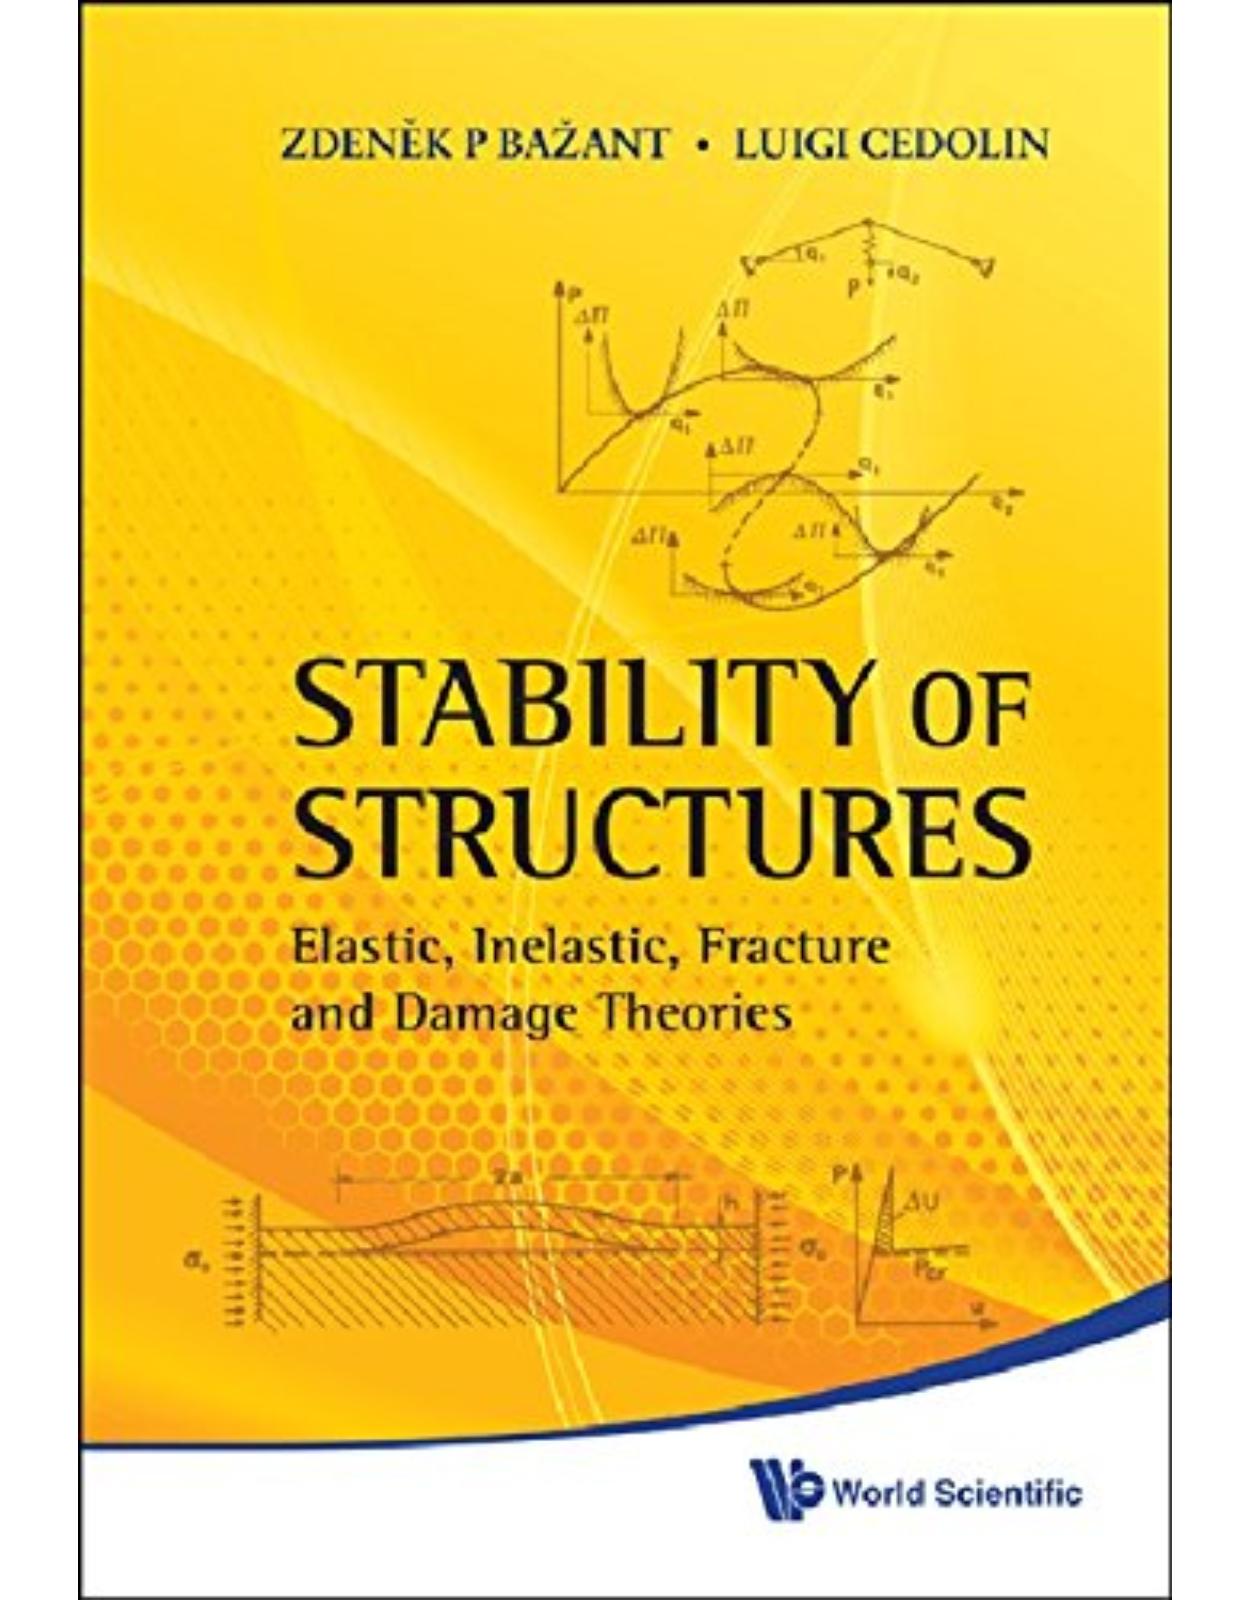 STABILITY OF STRUCTURES: ELASTIC, INELASTIC, FRACTURE AND DAMAGE THEORIES